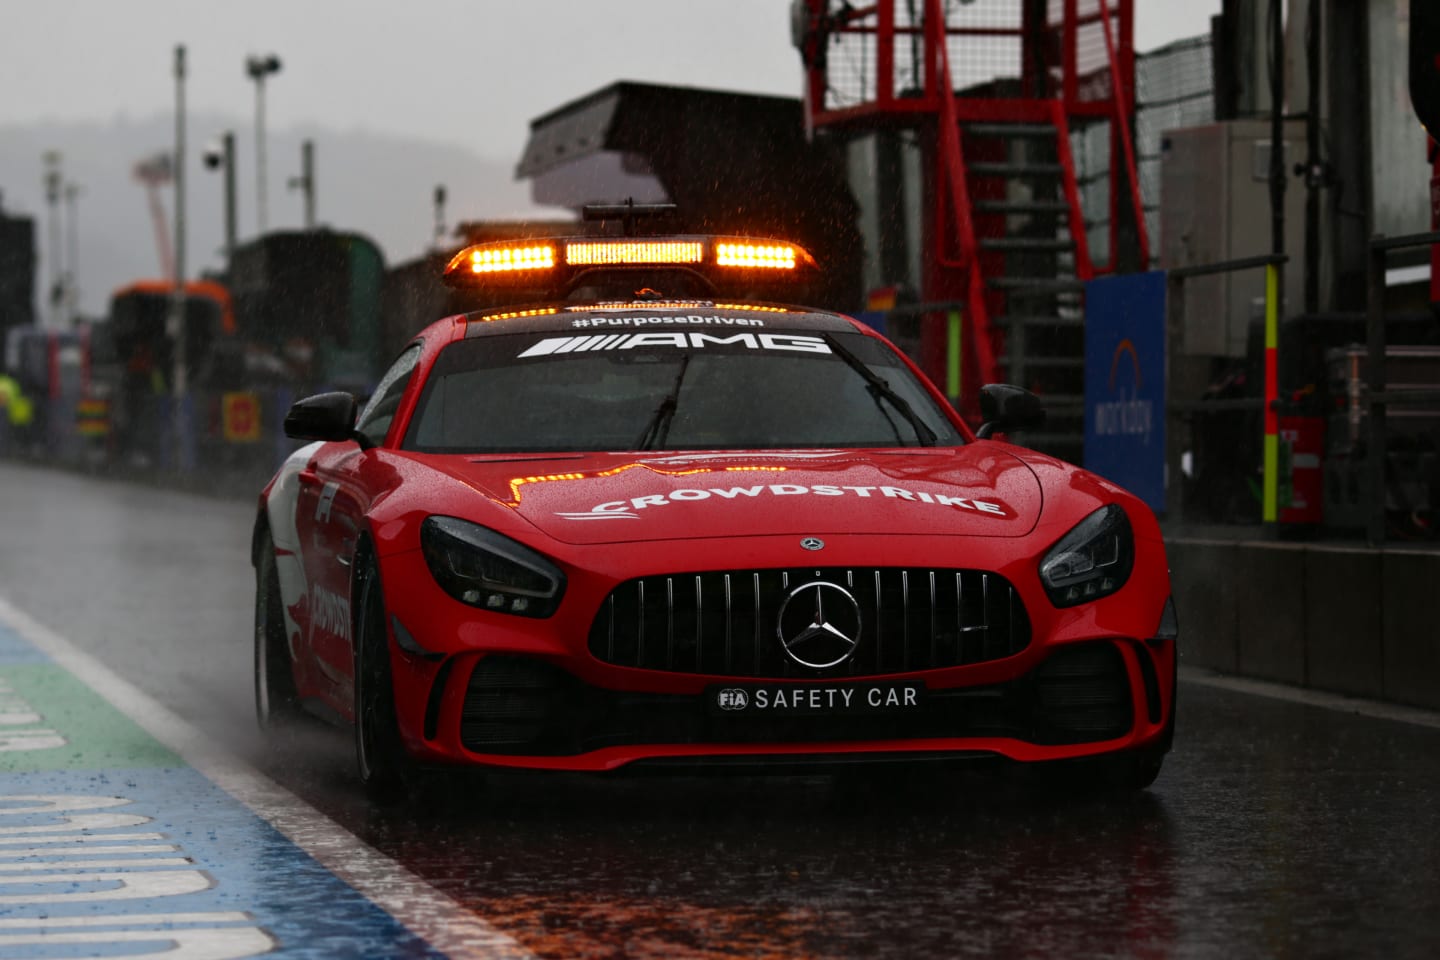 SPA, BELGIUM - AUGUST 28: The FIA Safety Car drives in a rain filled pitlane prior to qualifying